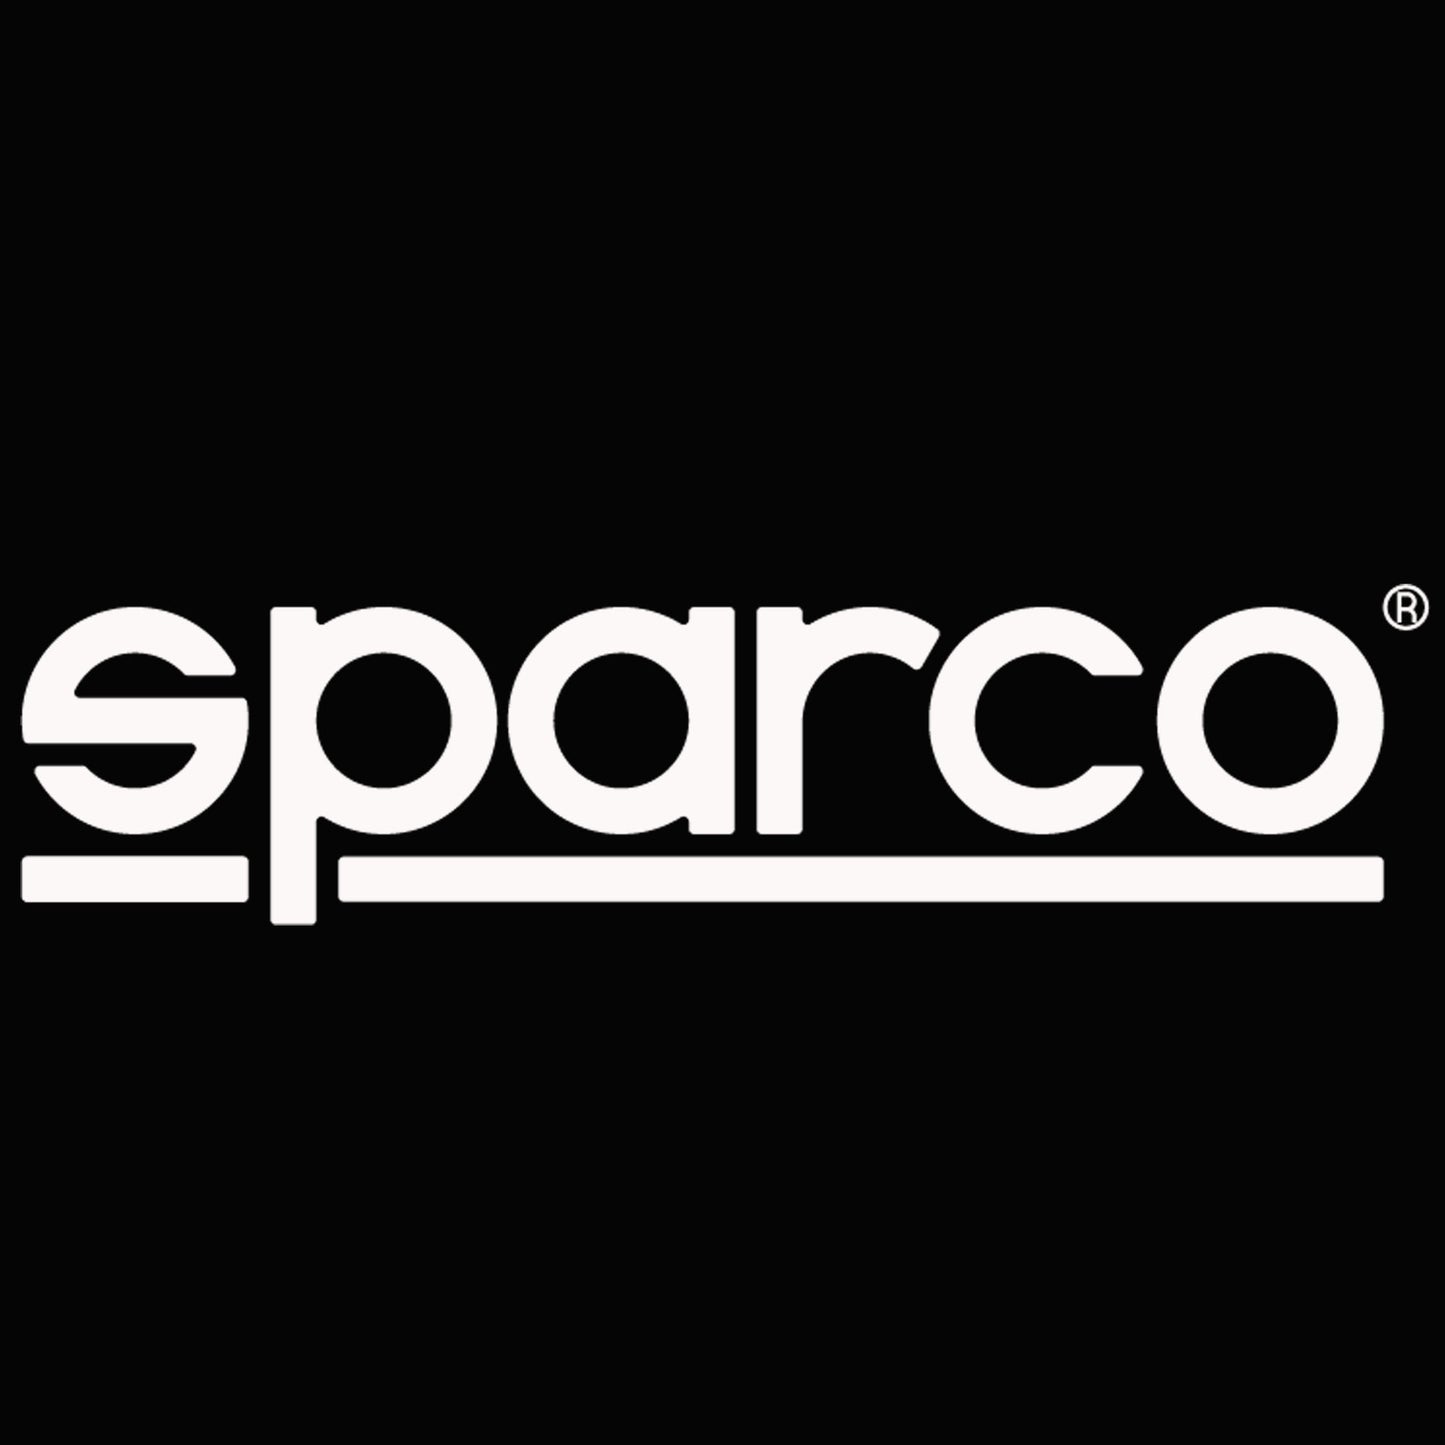 Sparco Hypergrip+ Gaming Gloves